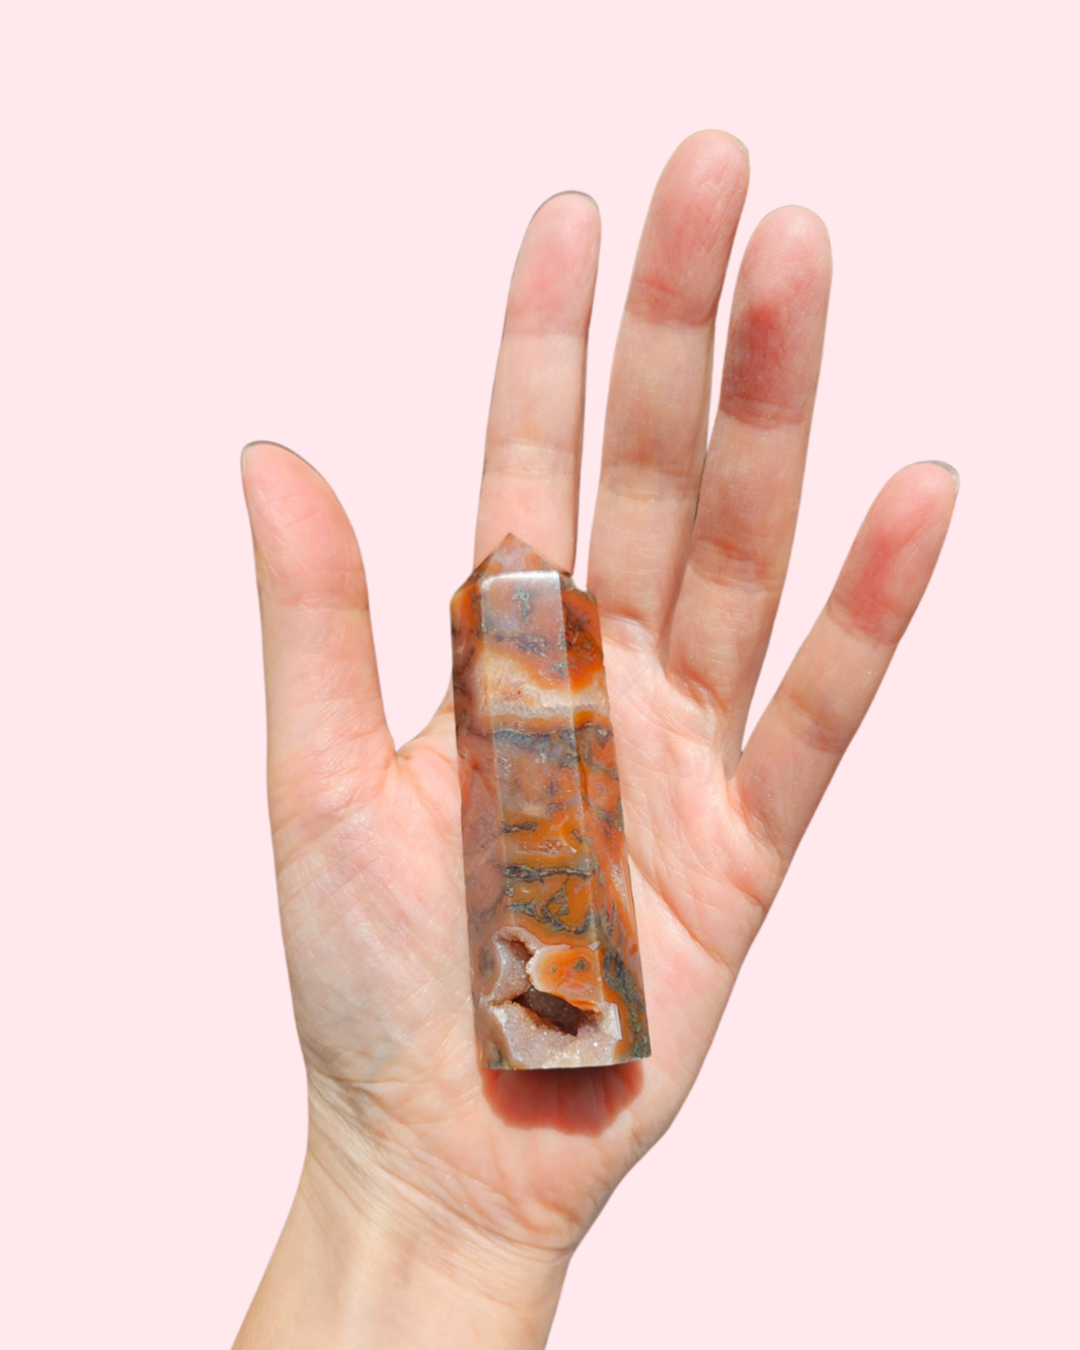 Red Moss Agate Point